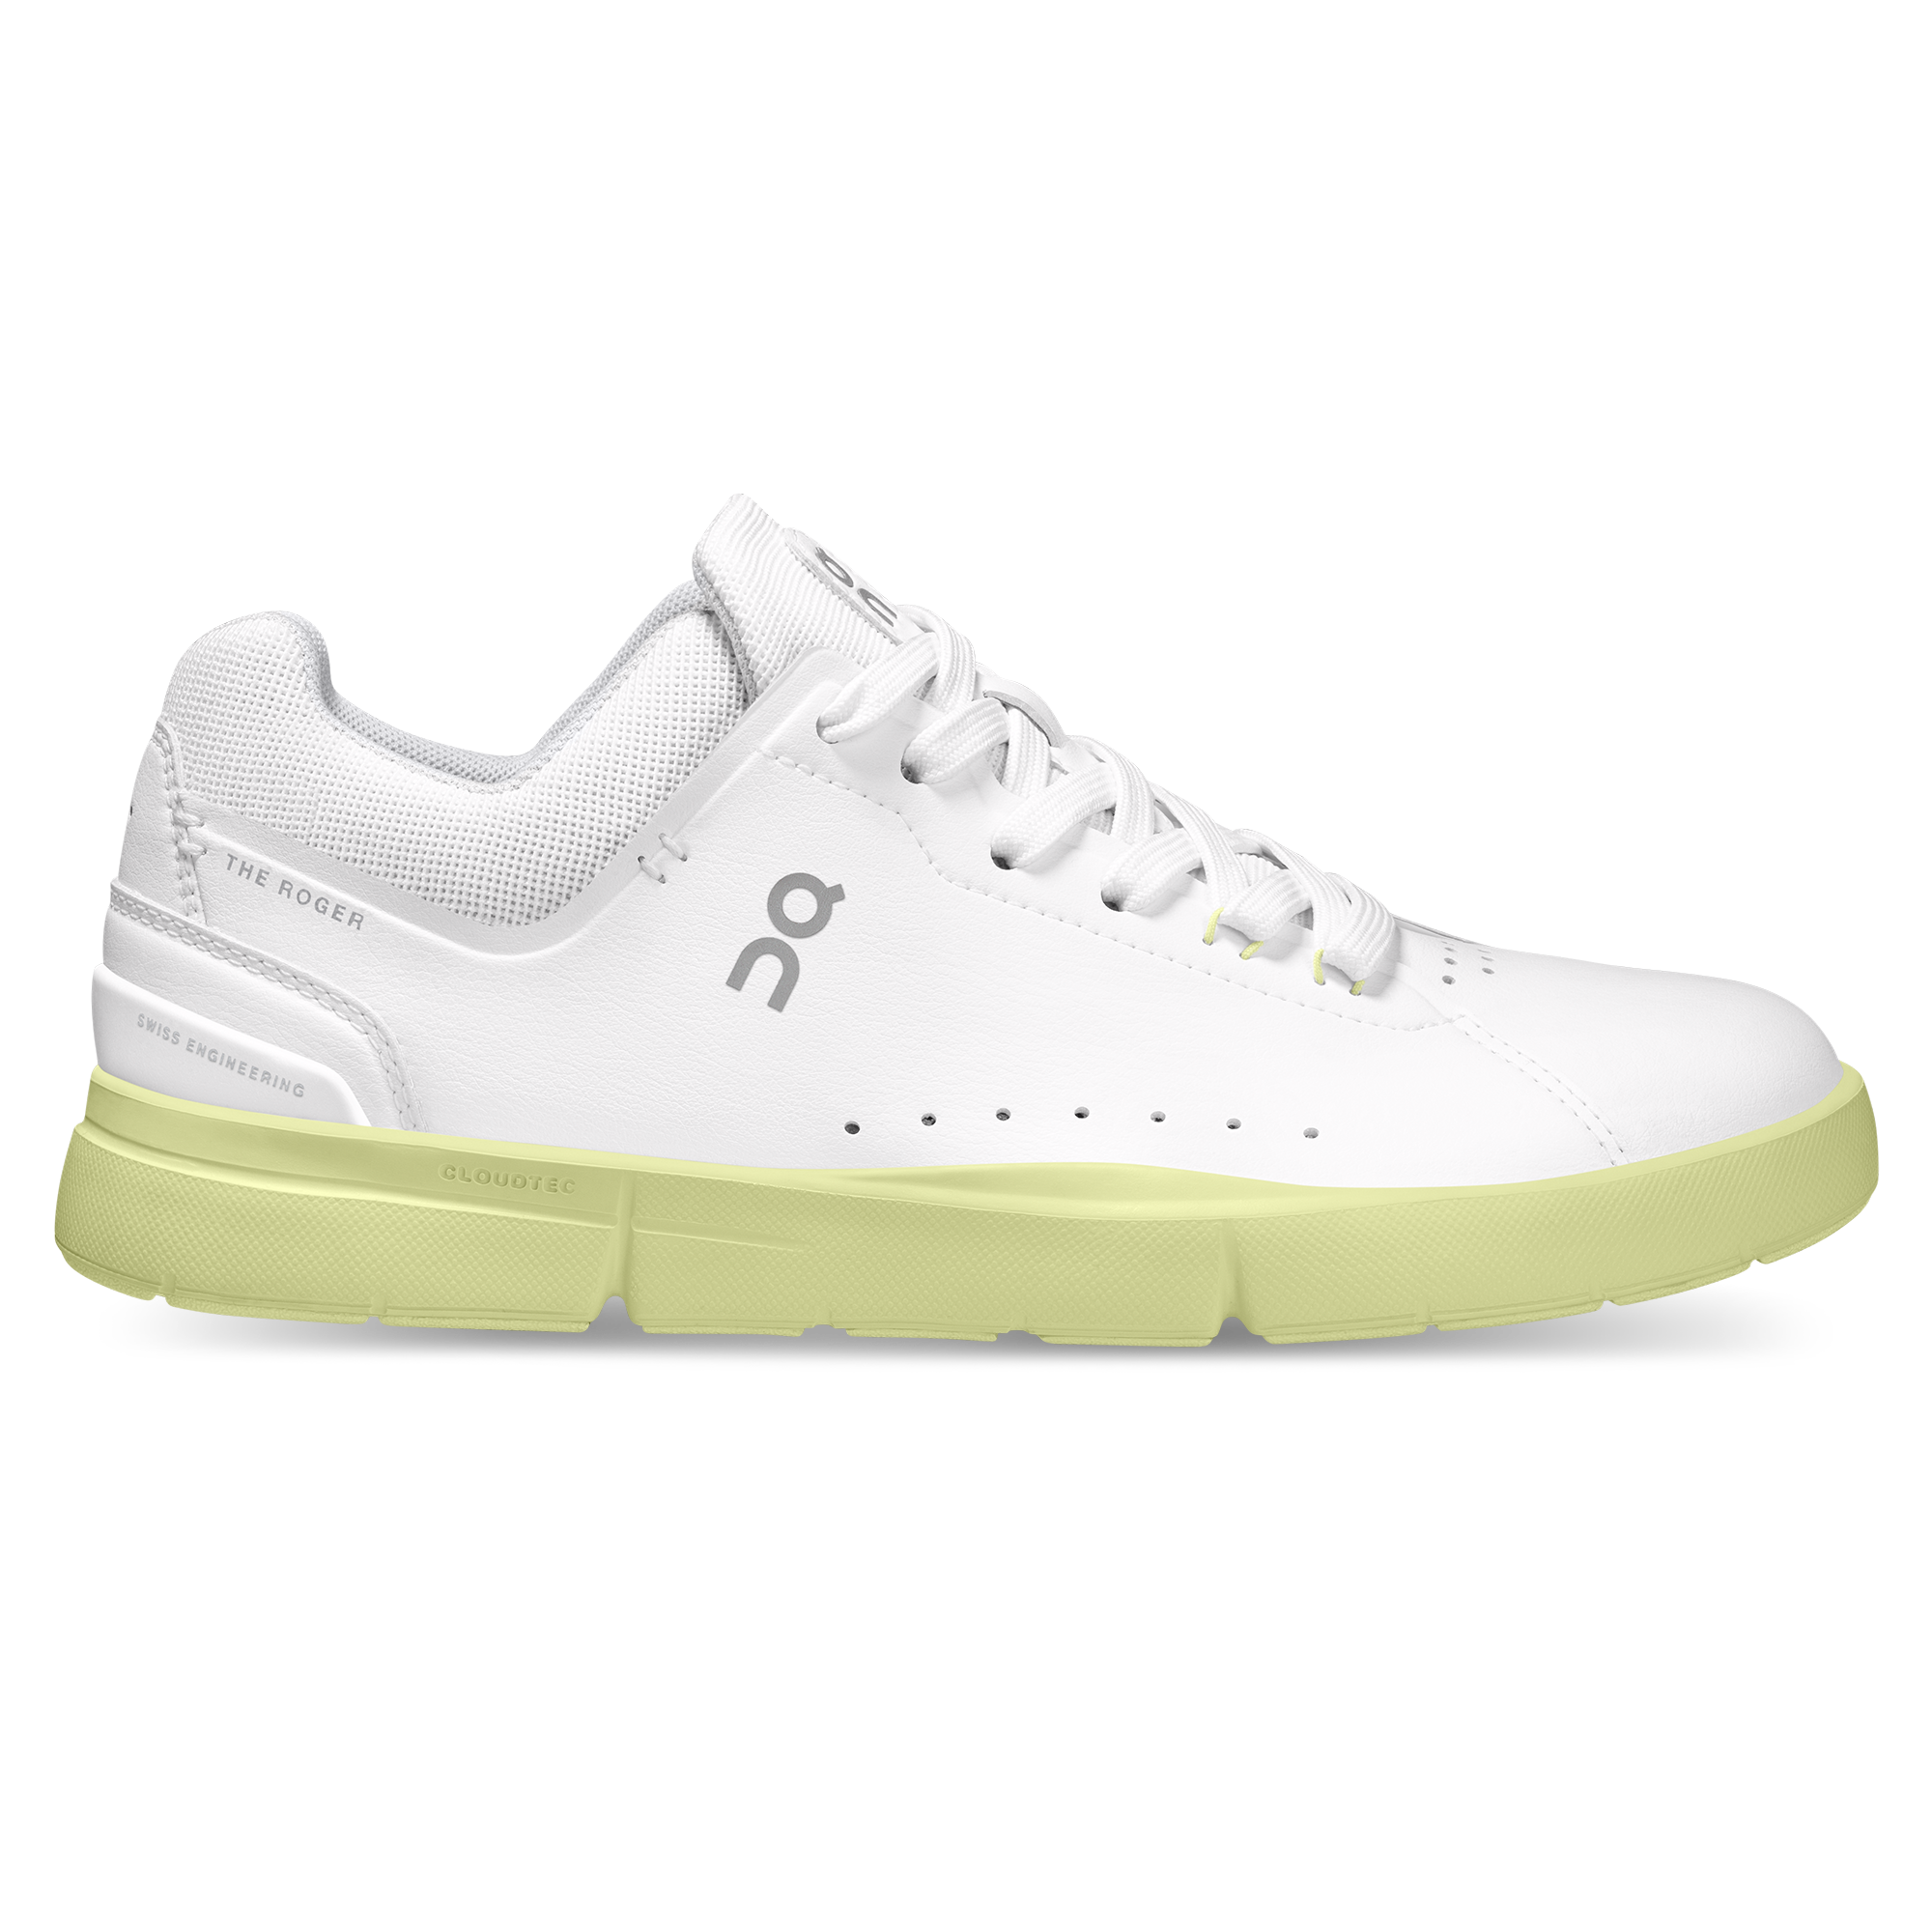 【WOMEN’S】On THE ROGER Advantage　White/Hay